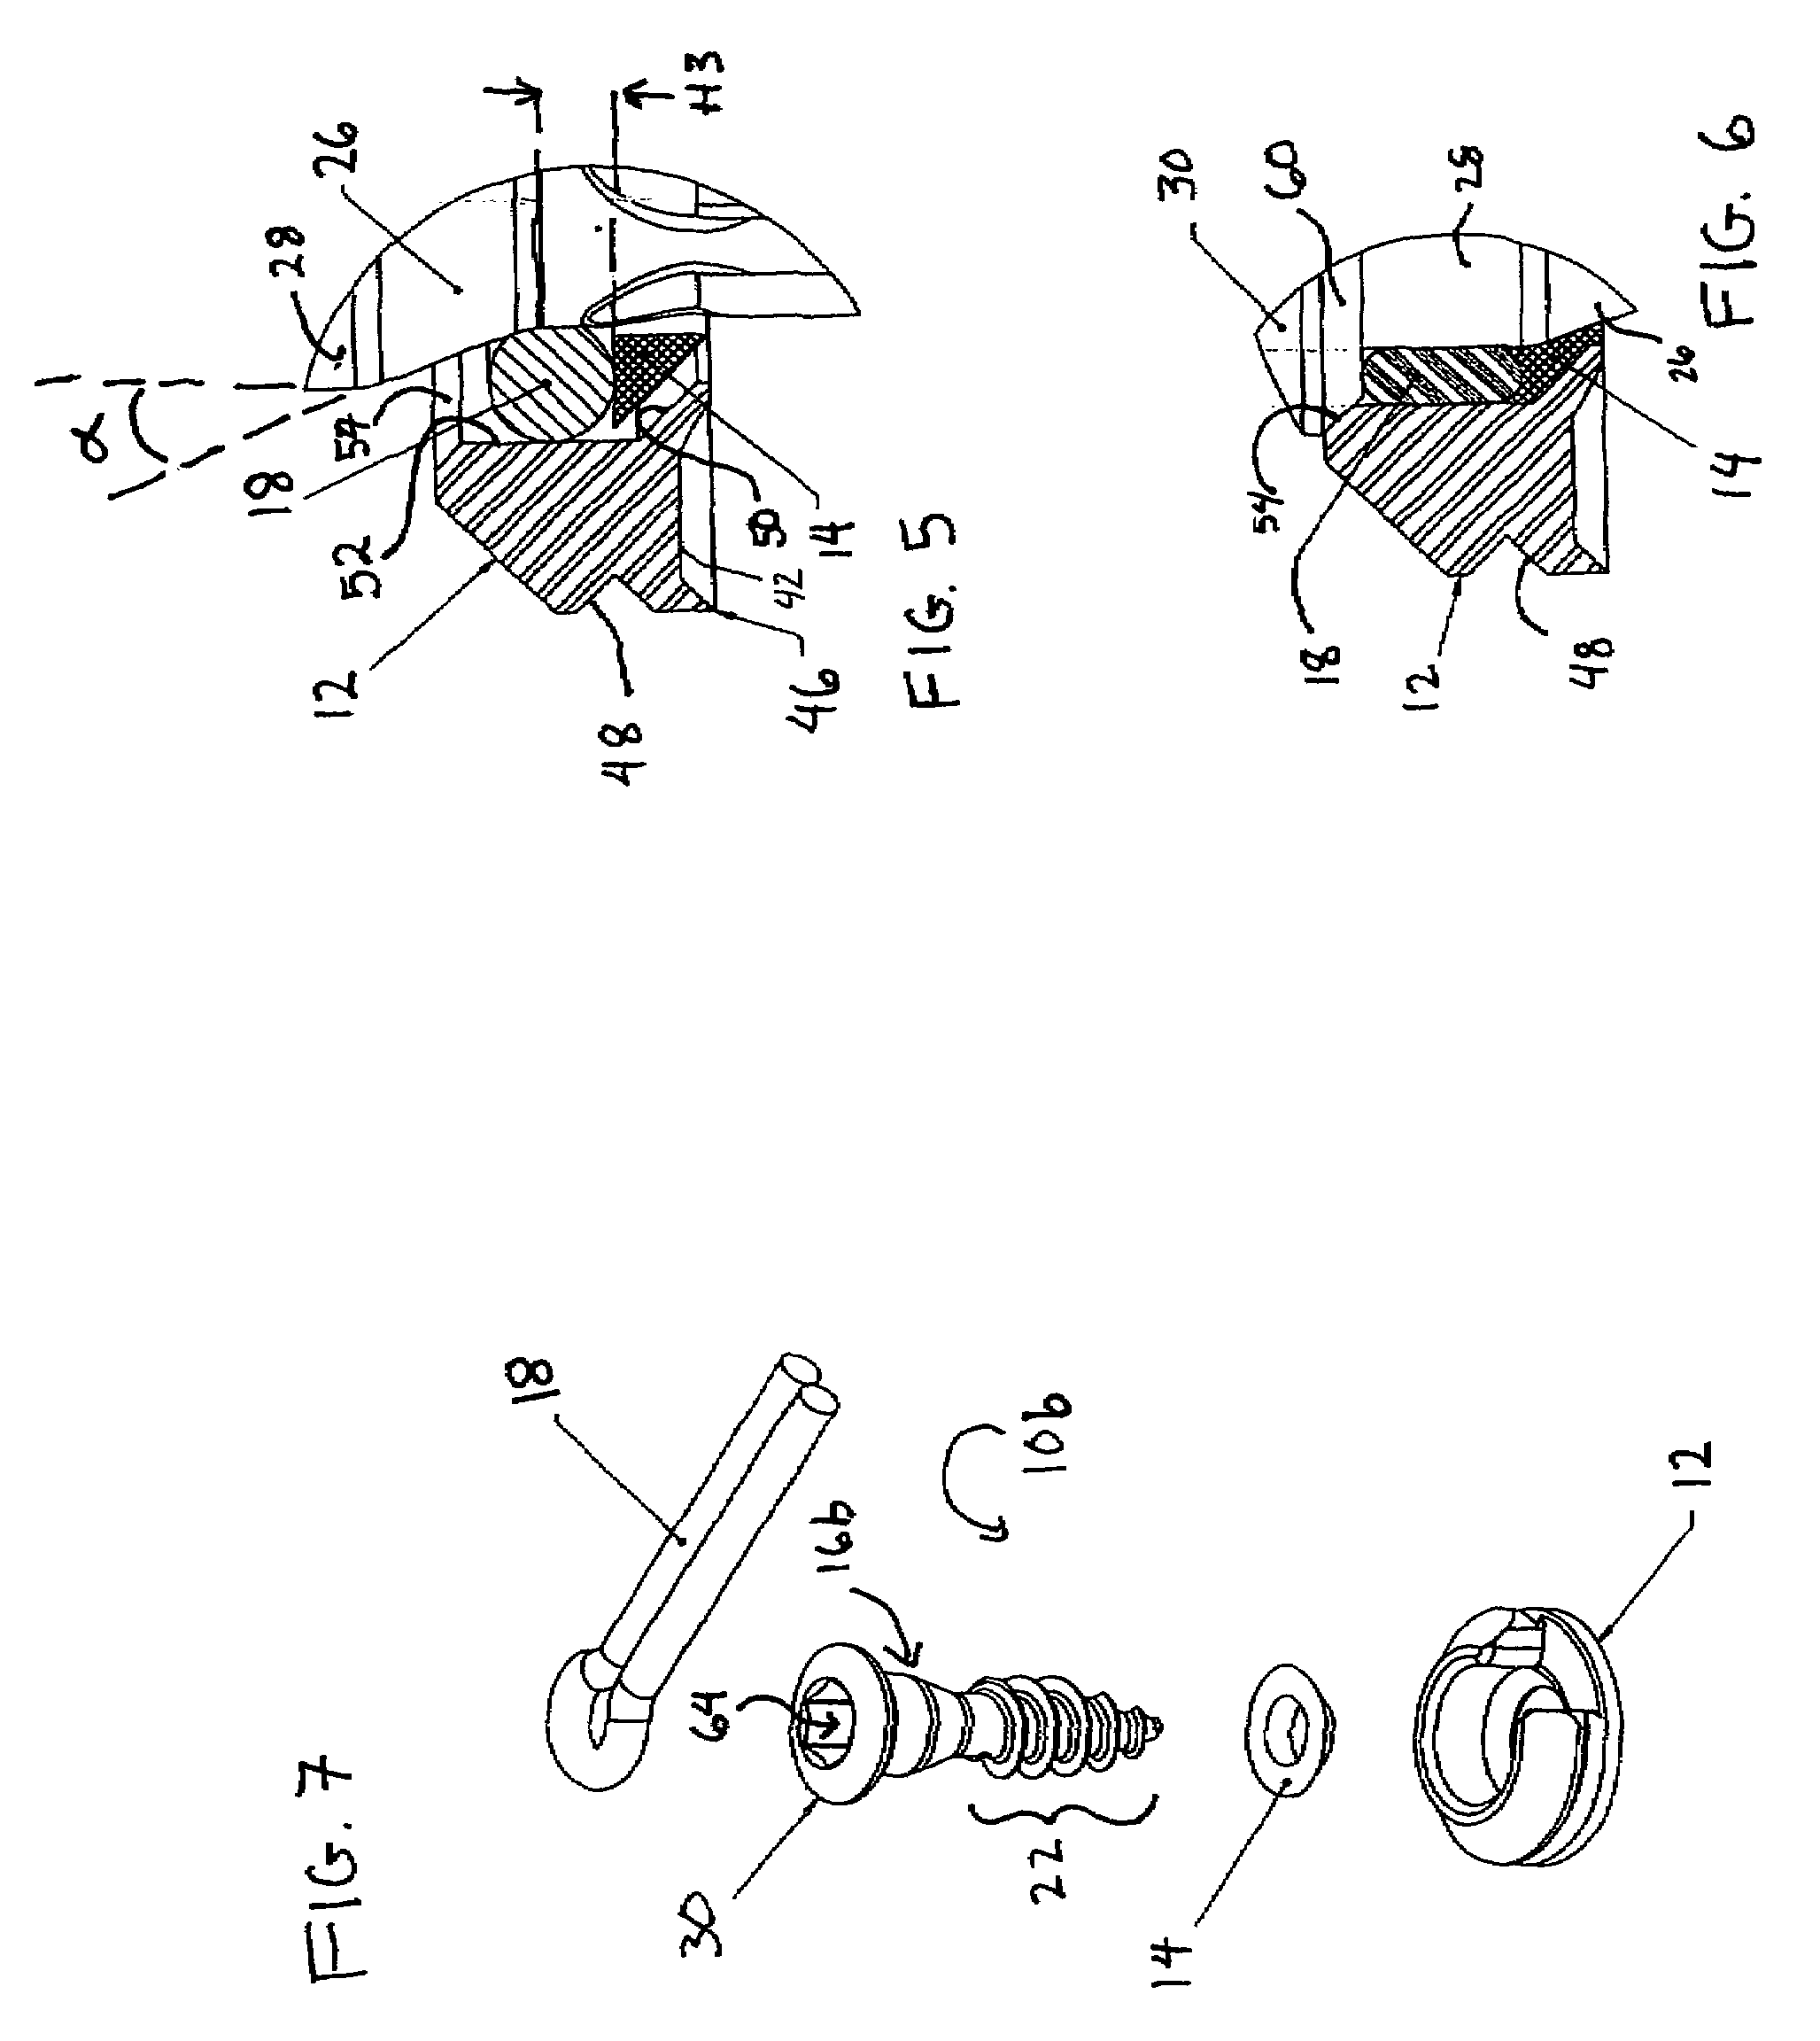 Cable anchor for attaching elastic cable to a bony substrate